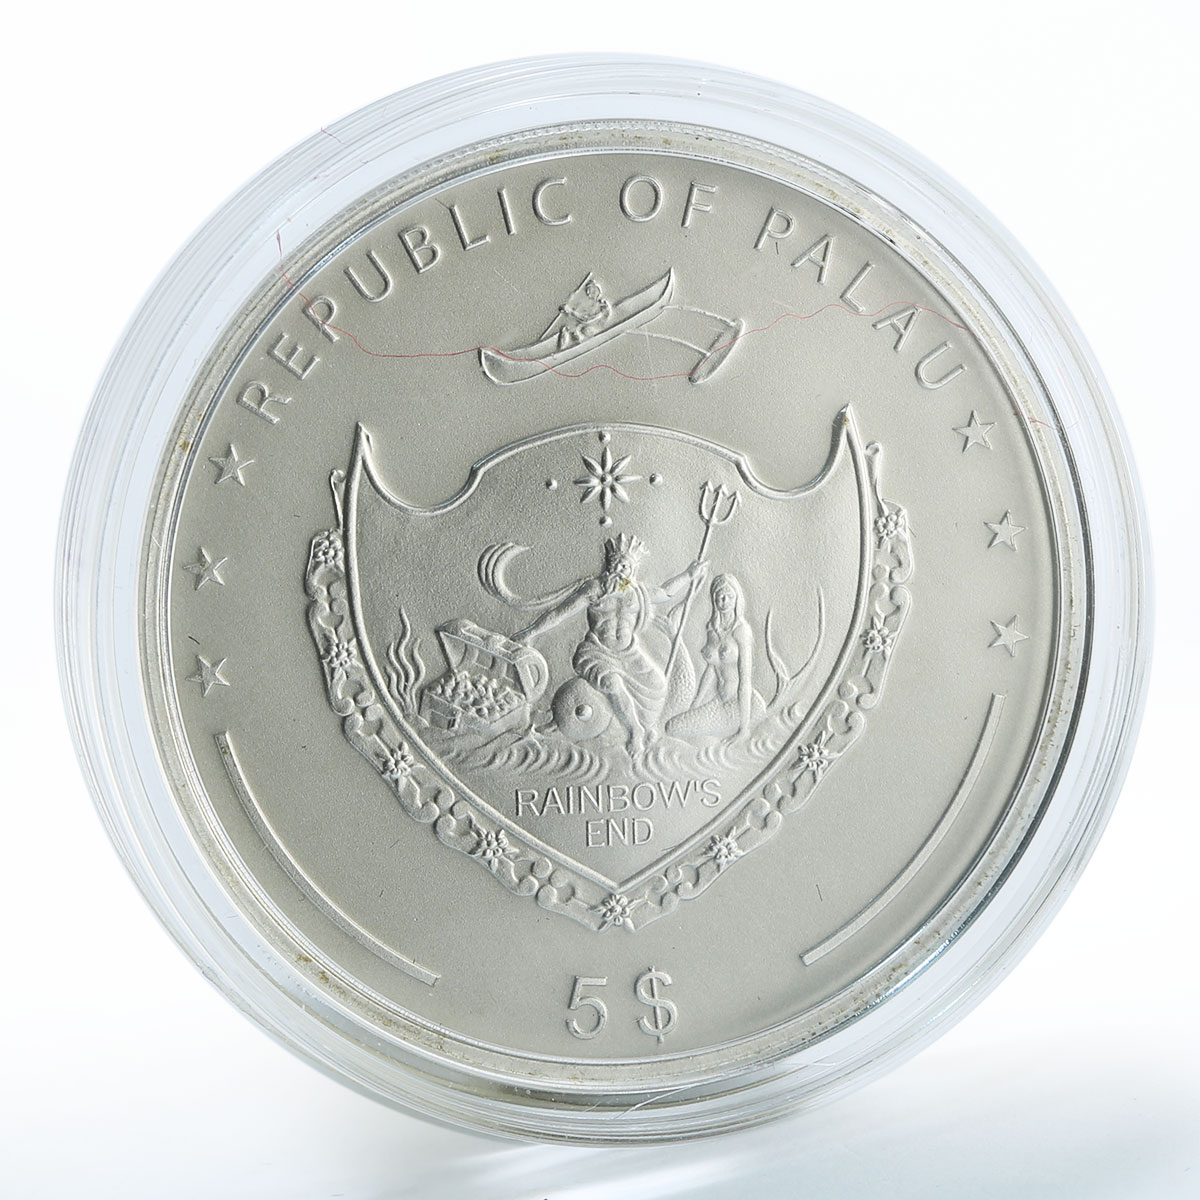 Palau 5 dollars Coconut Fragrance Scent of Paradise silver coin 2009